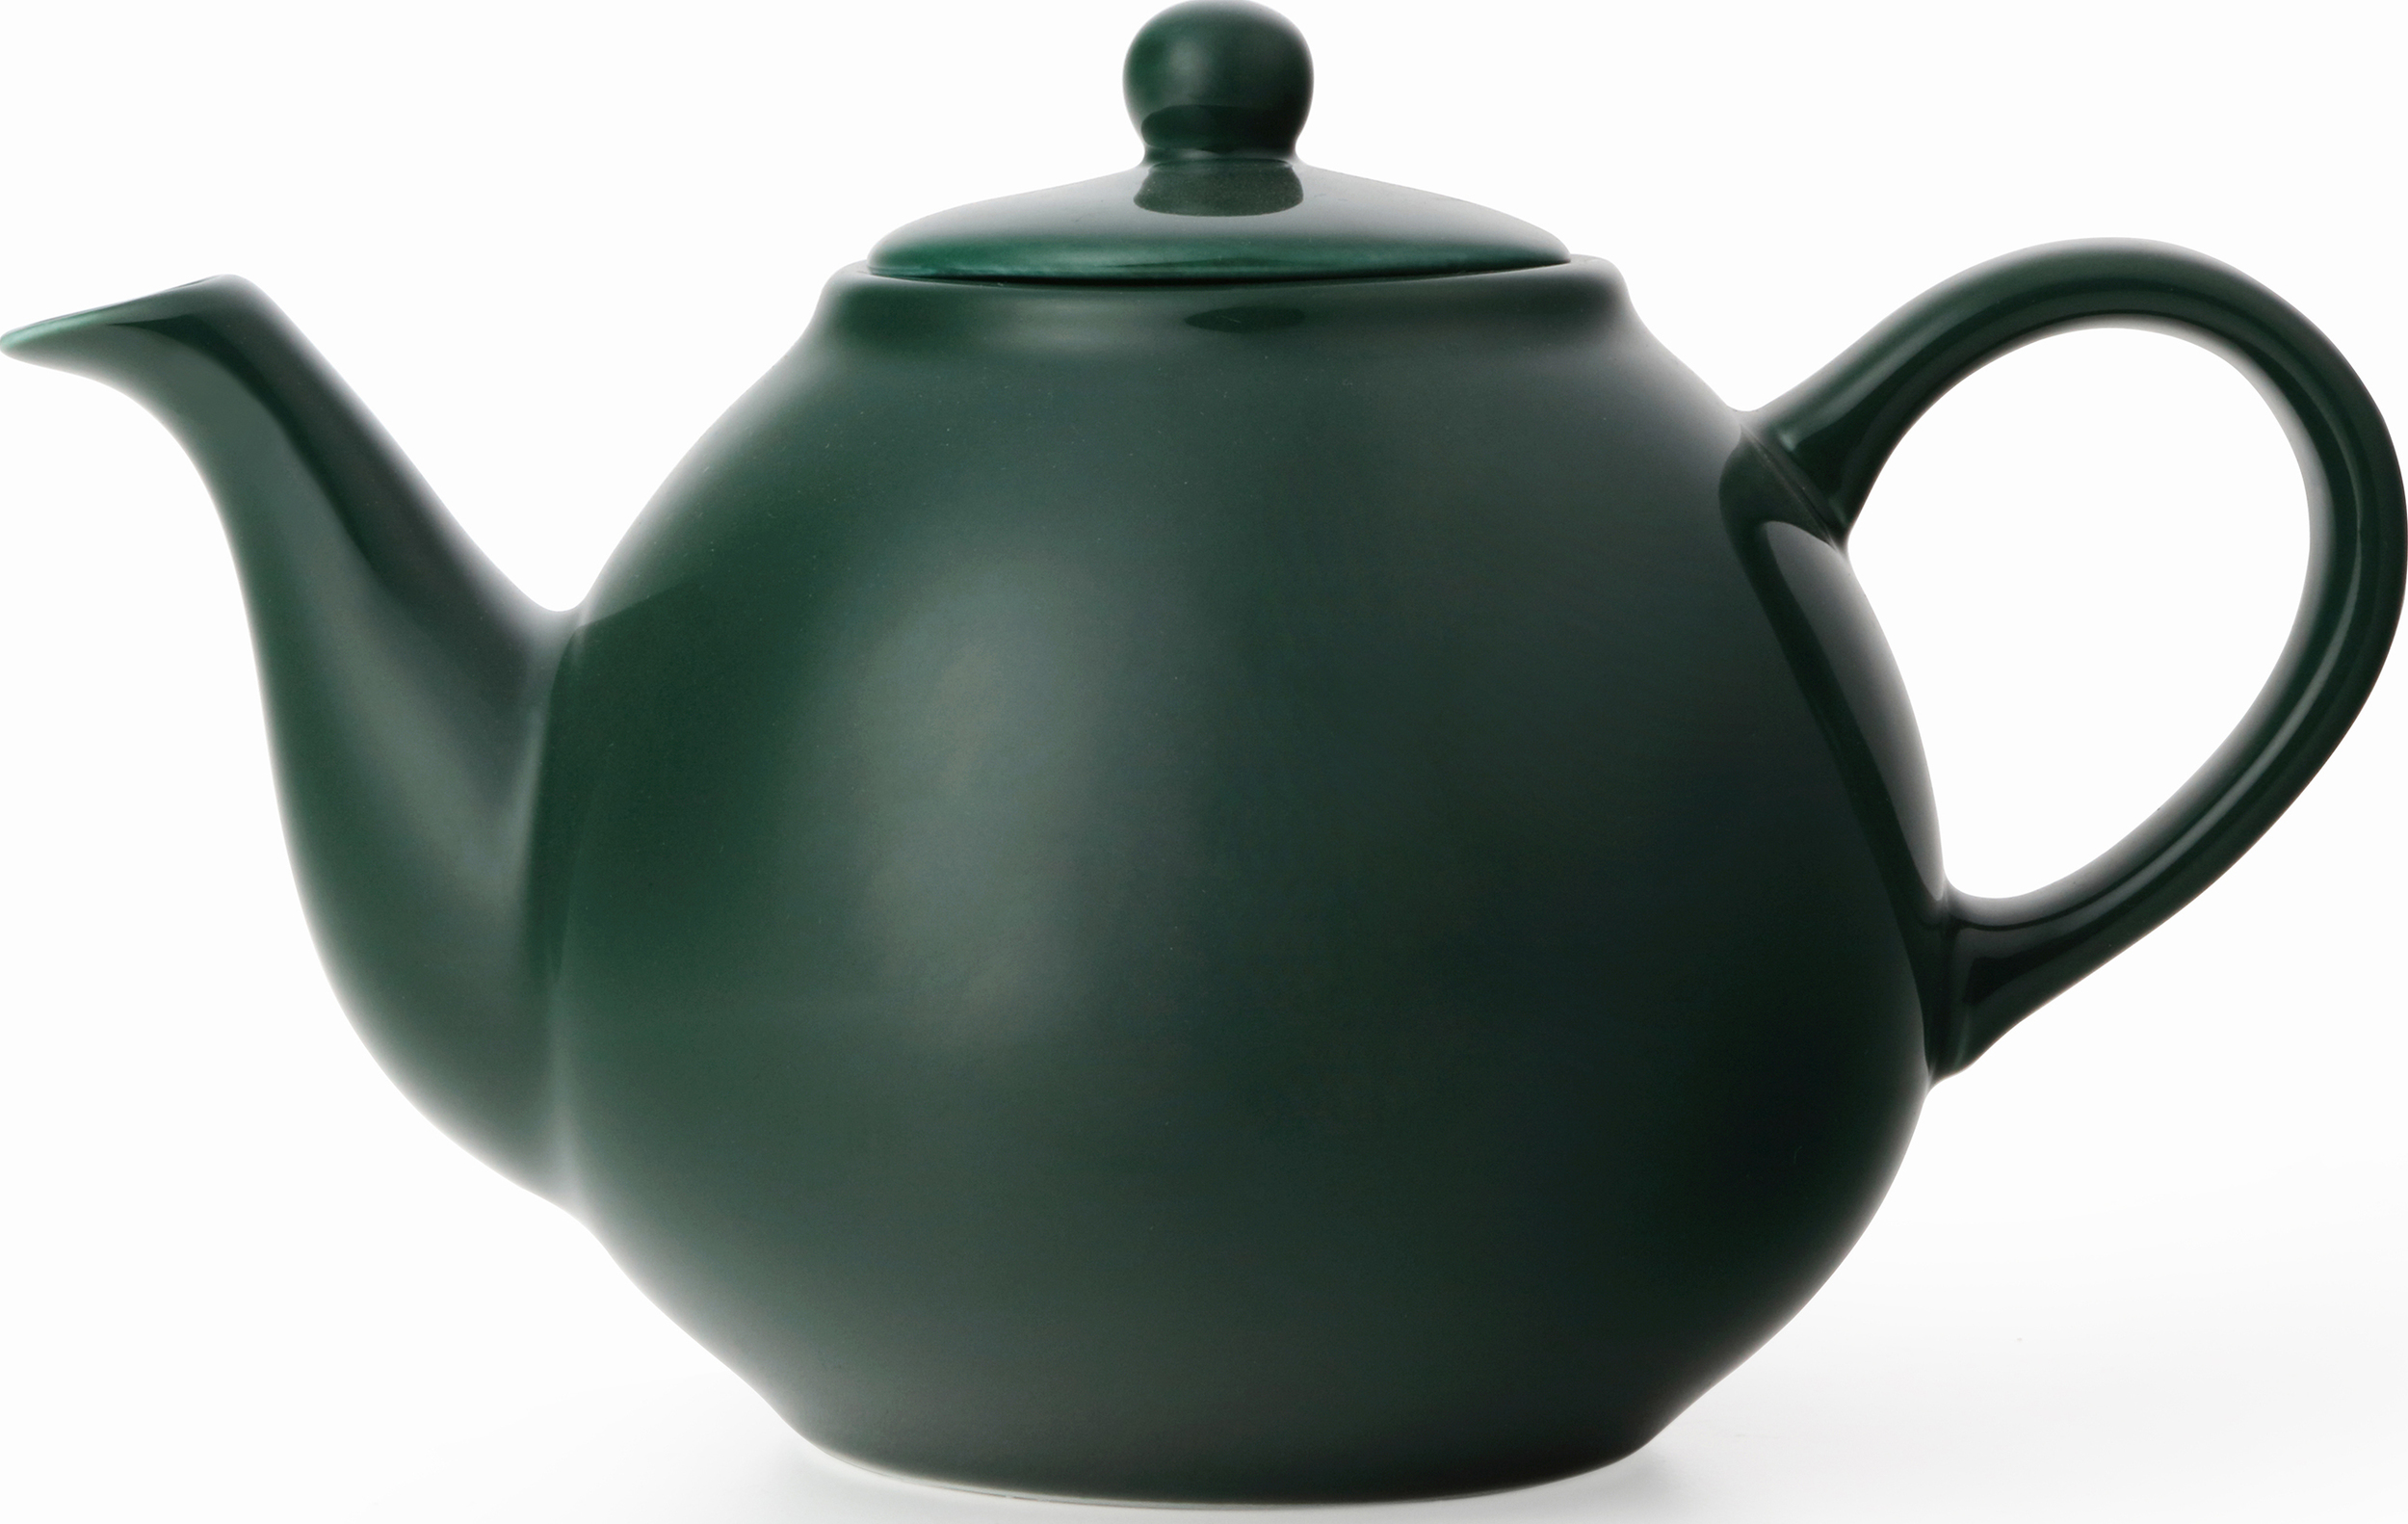 Classic™ Teapot - Green and Other Colors - VIVA